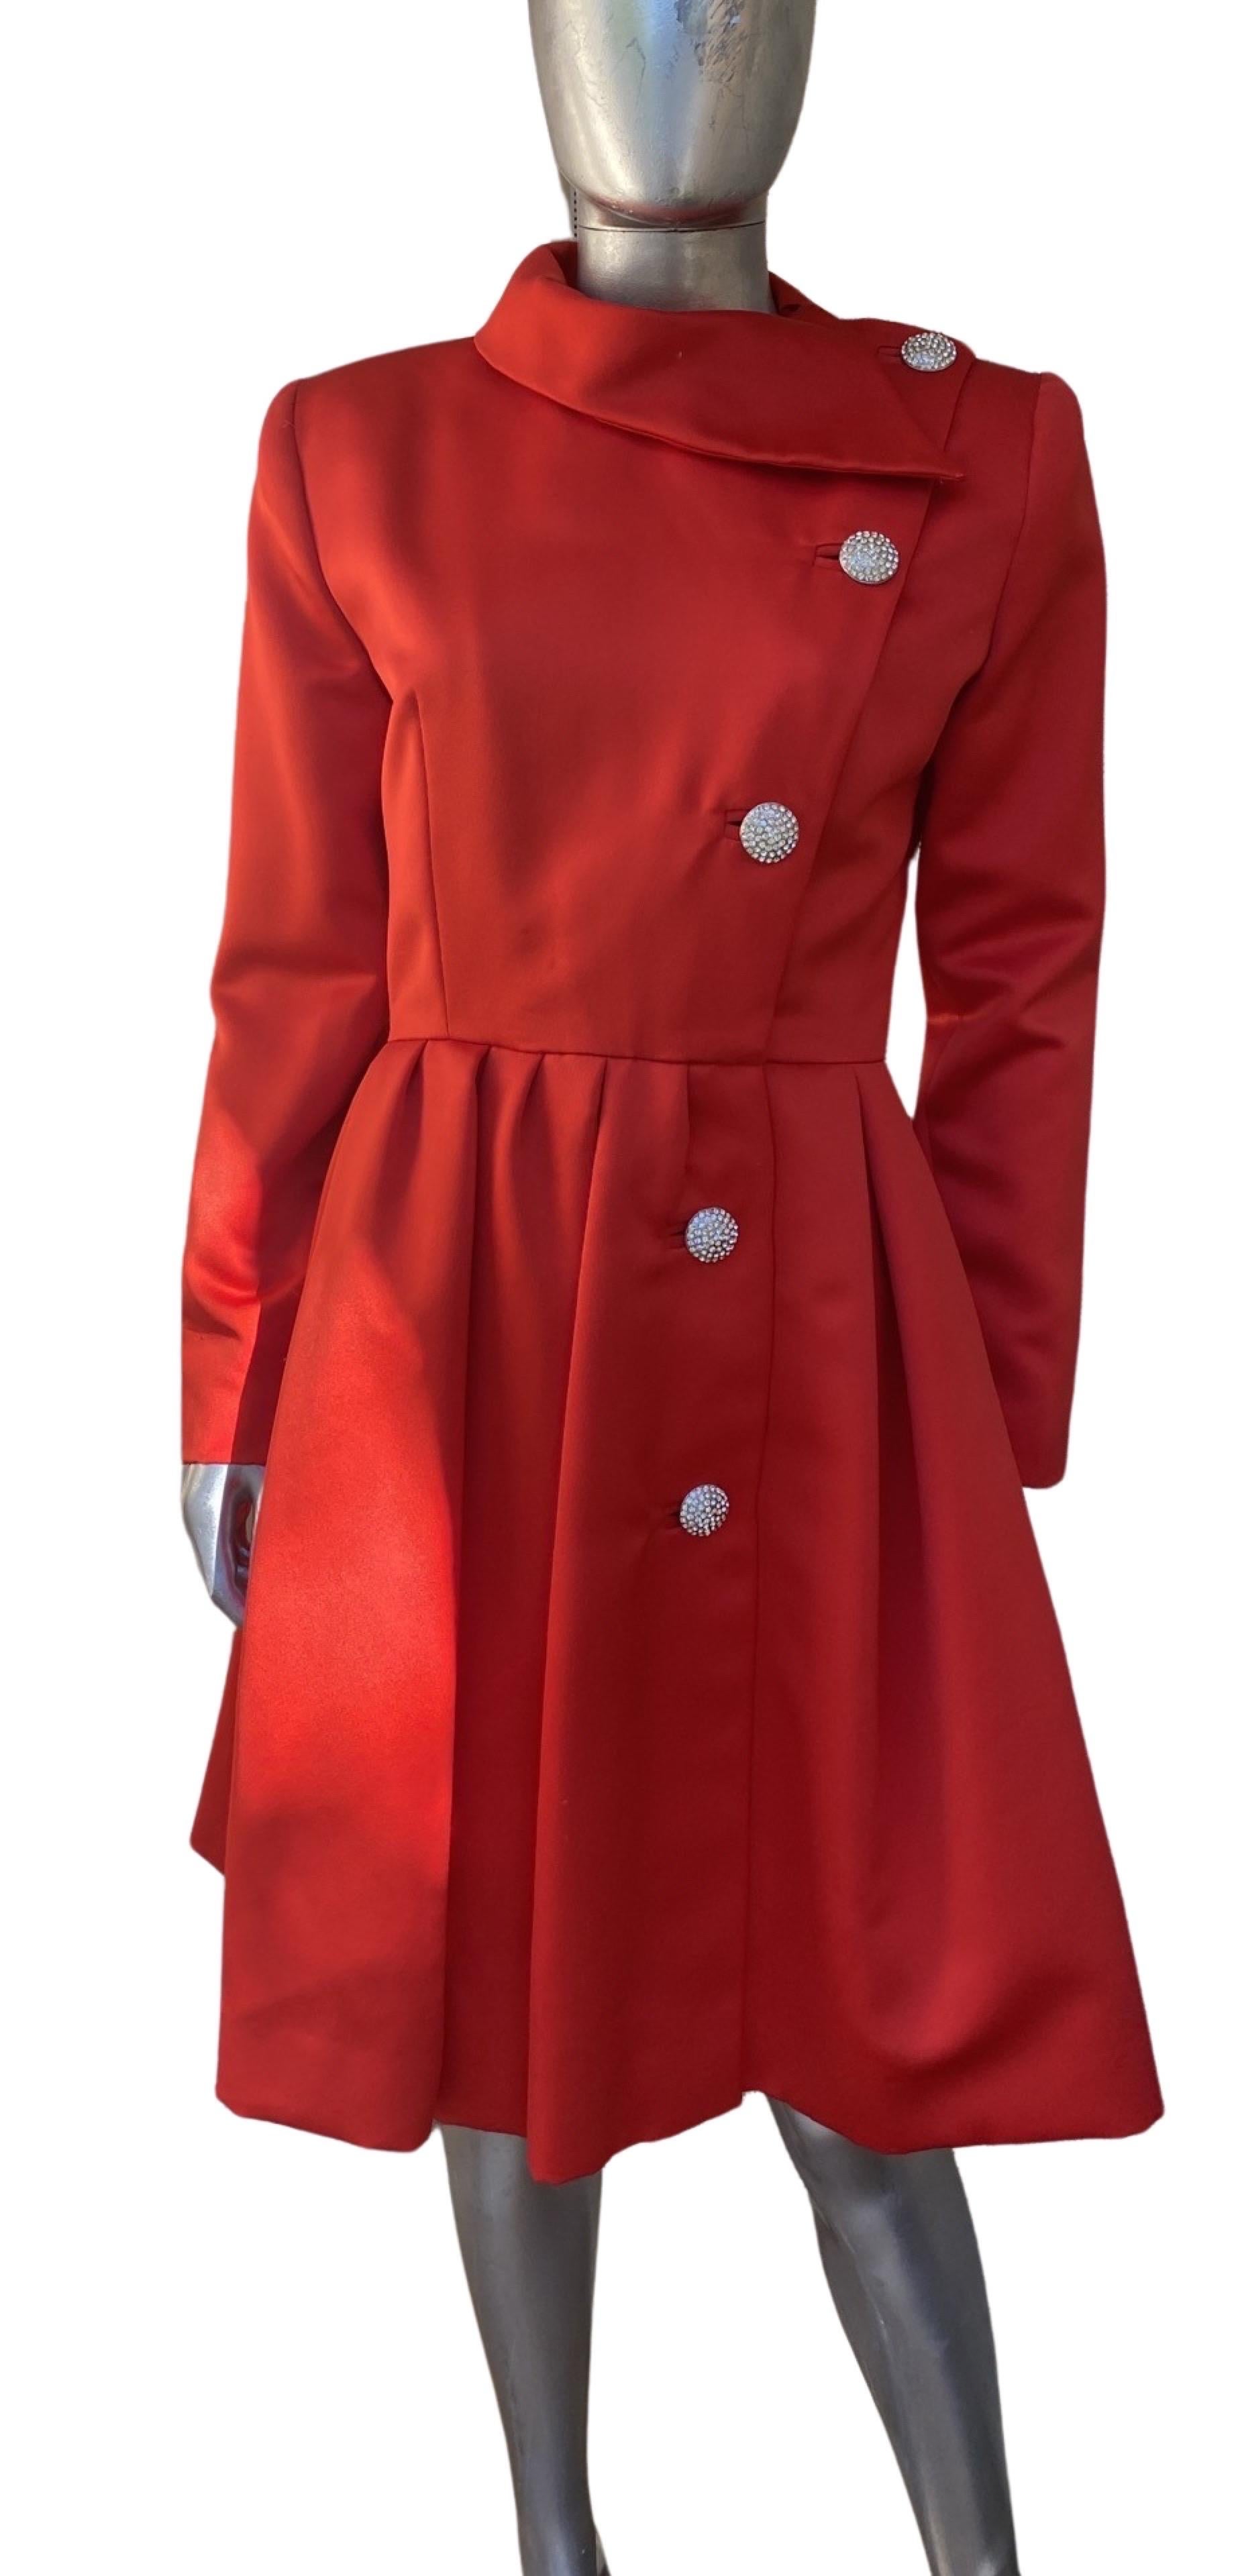 Red Satin and Rhinestone Button Coat Dress by Victor Costa Neiman Marcus Size 8 For Sale 6